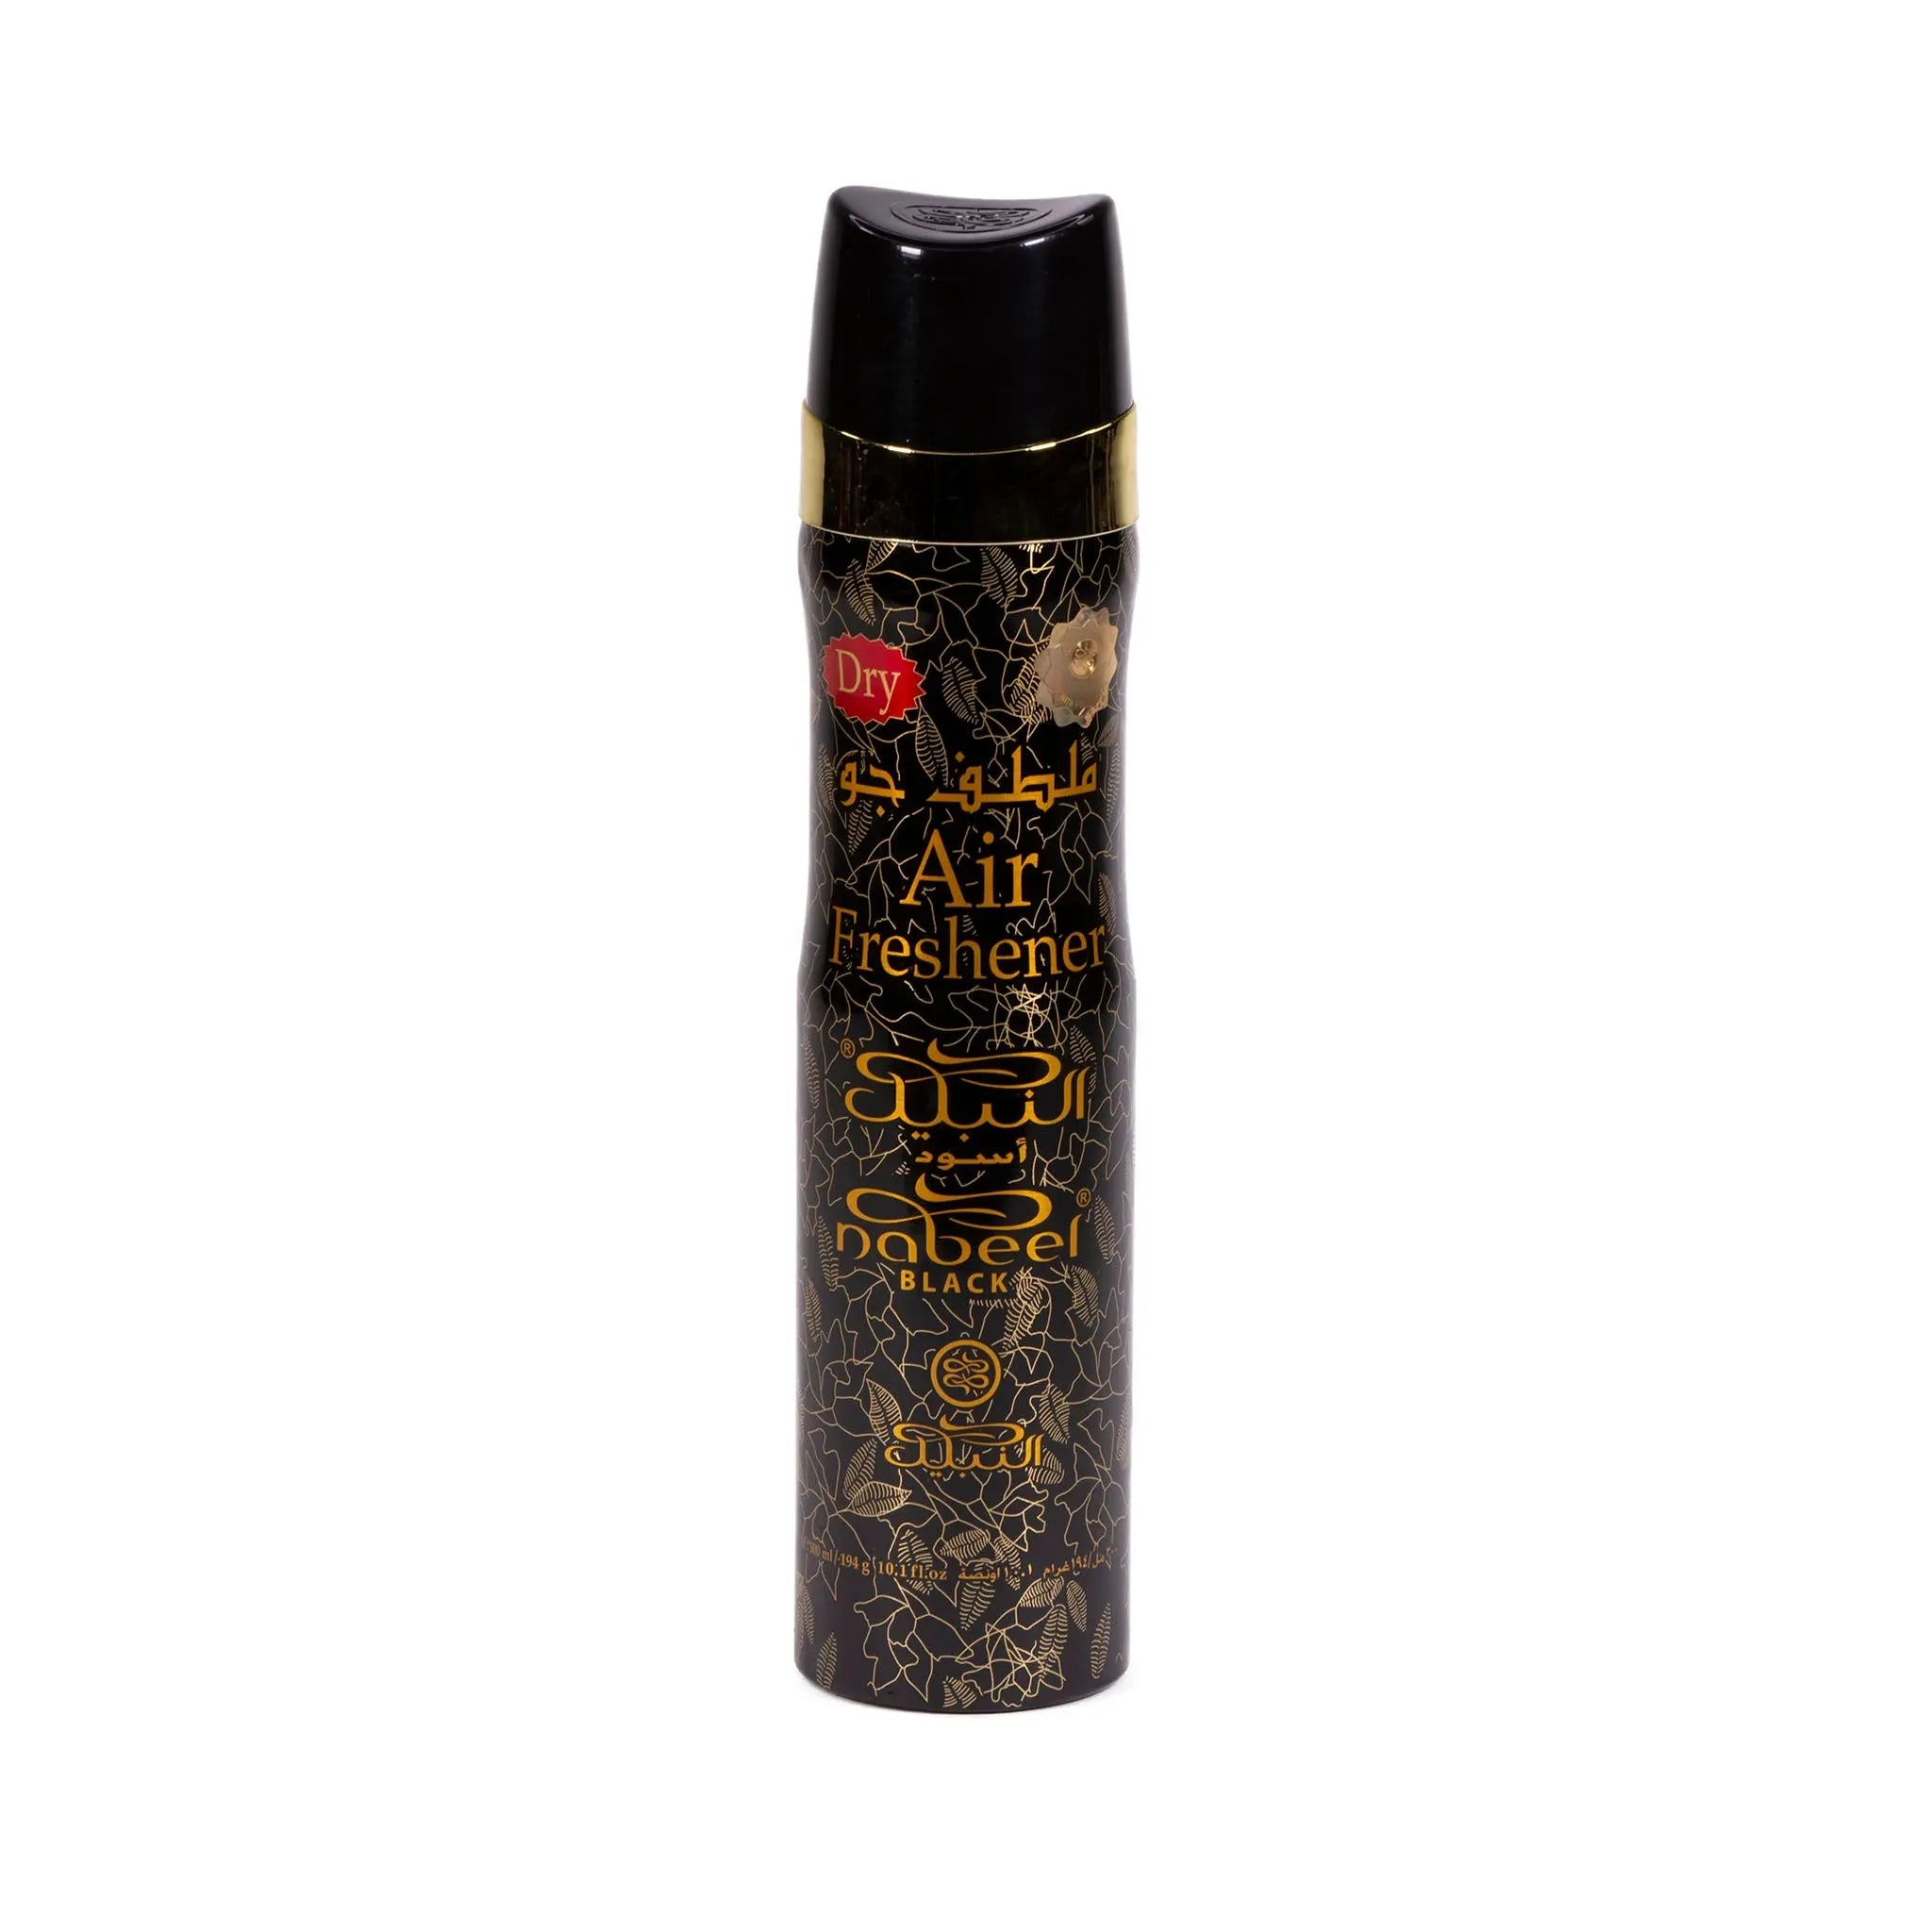 The image features an air freshener can named "Nabeel Black." The can is predominantly black with gold and white text and intricate gold patterns. It reads "Air Freshener" in both Arabic and English, and "Dry" is indicated at the top. There is a rose emblem near the middle. The design of the can suggests a sophisticated and possibly masculine fragrance. The can has a black cap and is set against a white background, highlighting the contrast and detailing of its design.